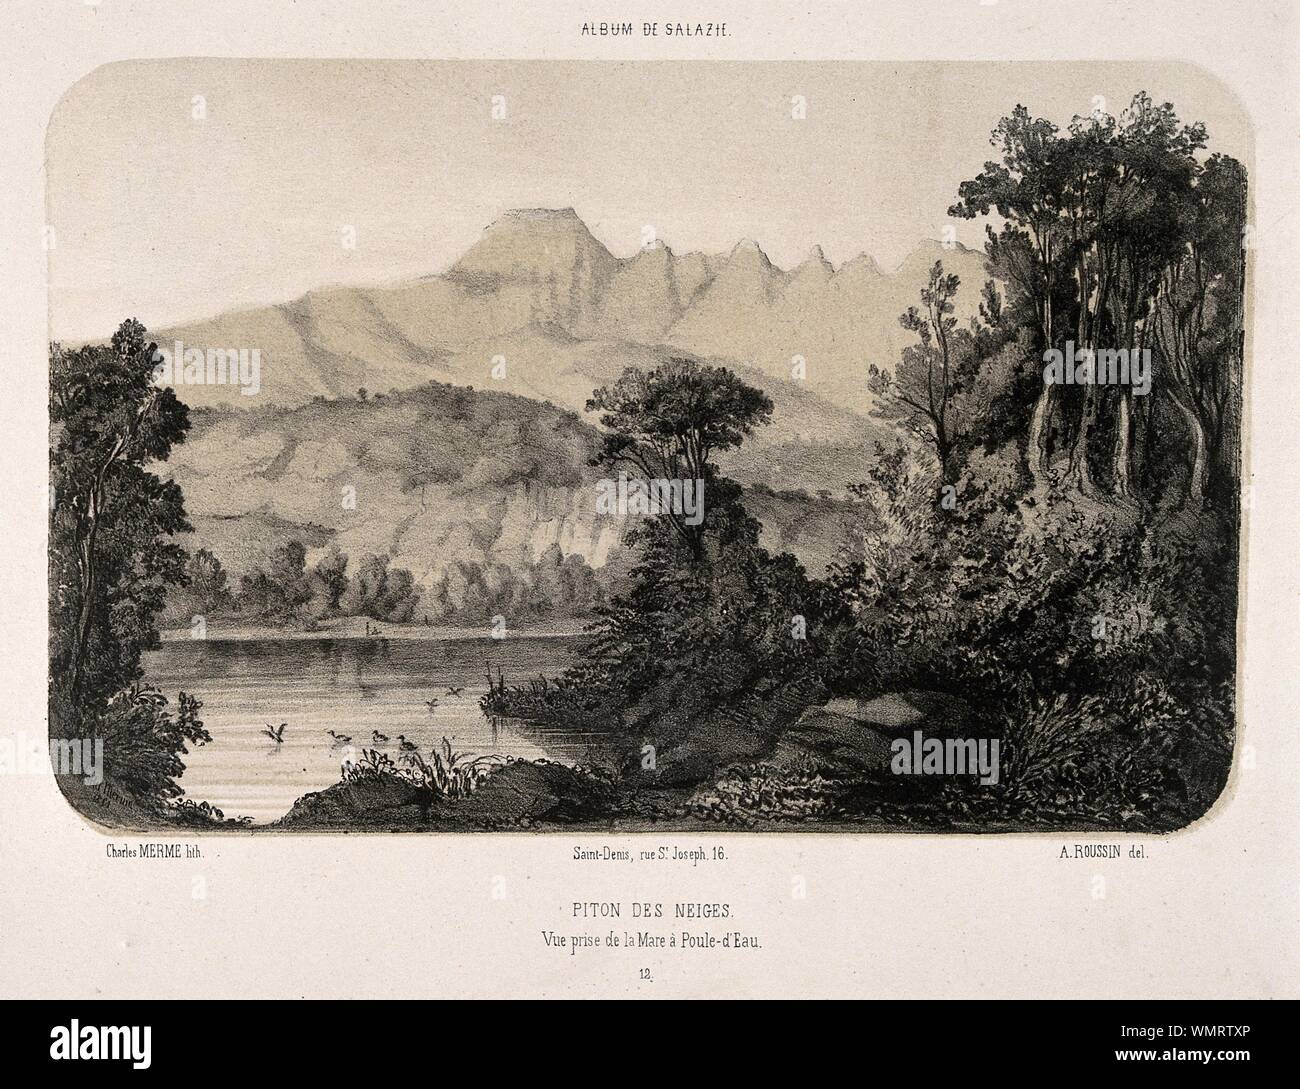 Slazie, Runion Islands the mountains and moorhen pond. Tinted lithograph by C. Merme, 1831, after A. Roussin..jpg - WMRTXP Stock Photo